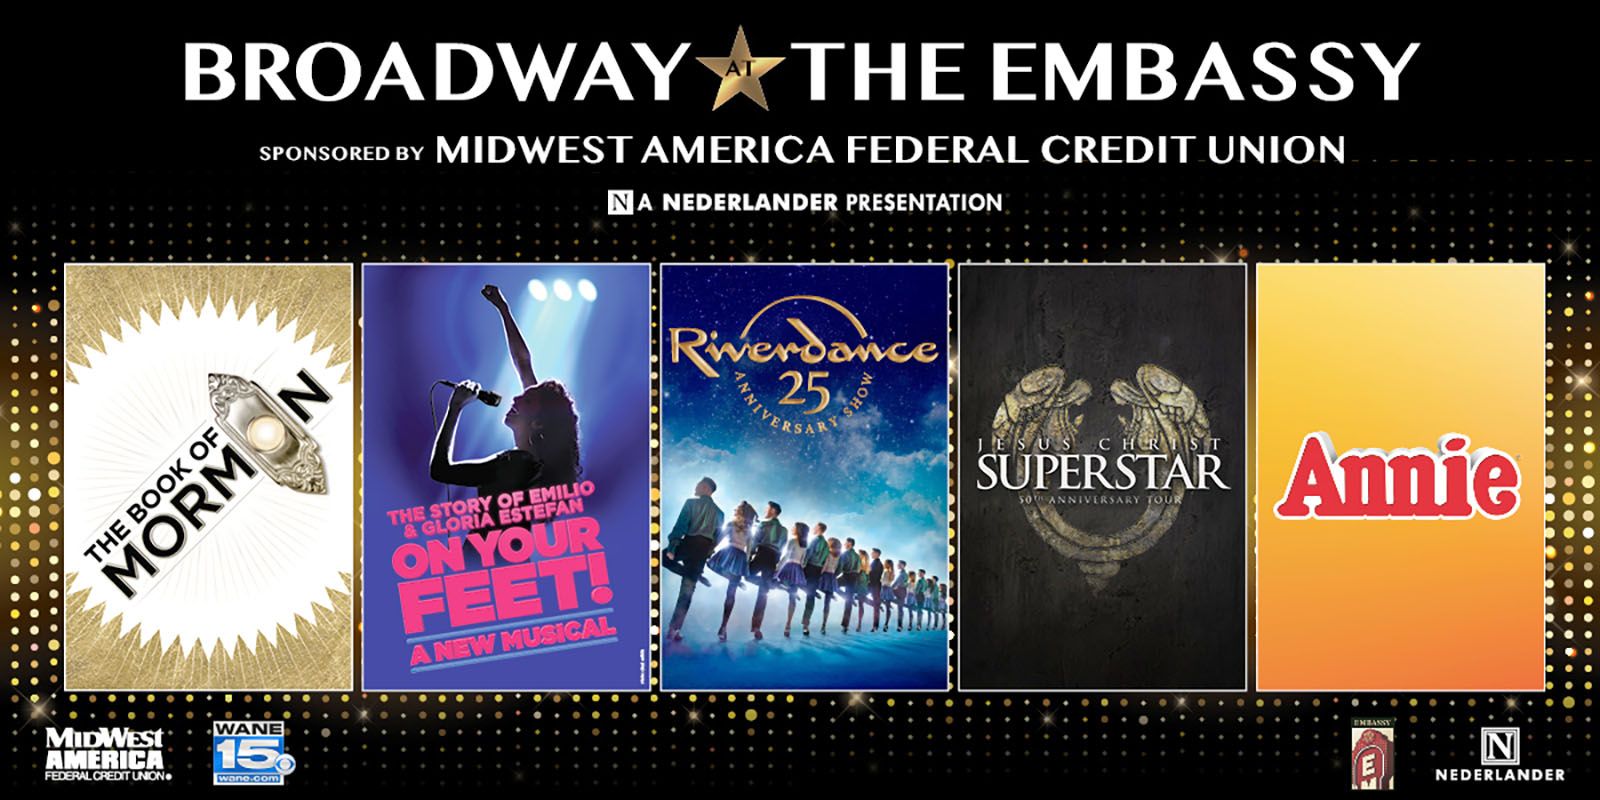 Broadway at the Embassy returns in October.